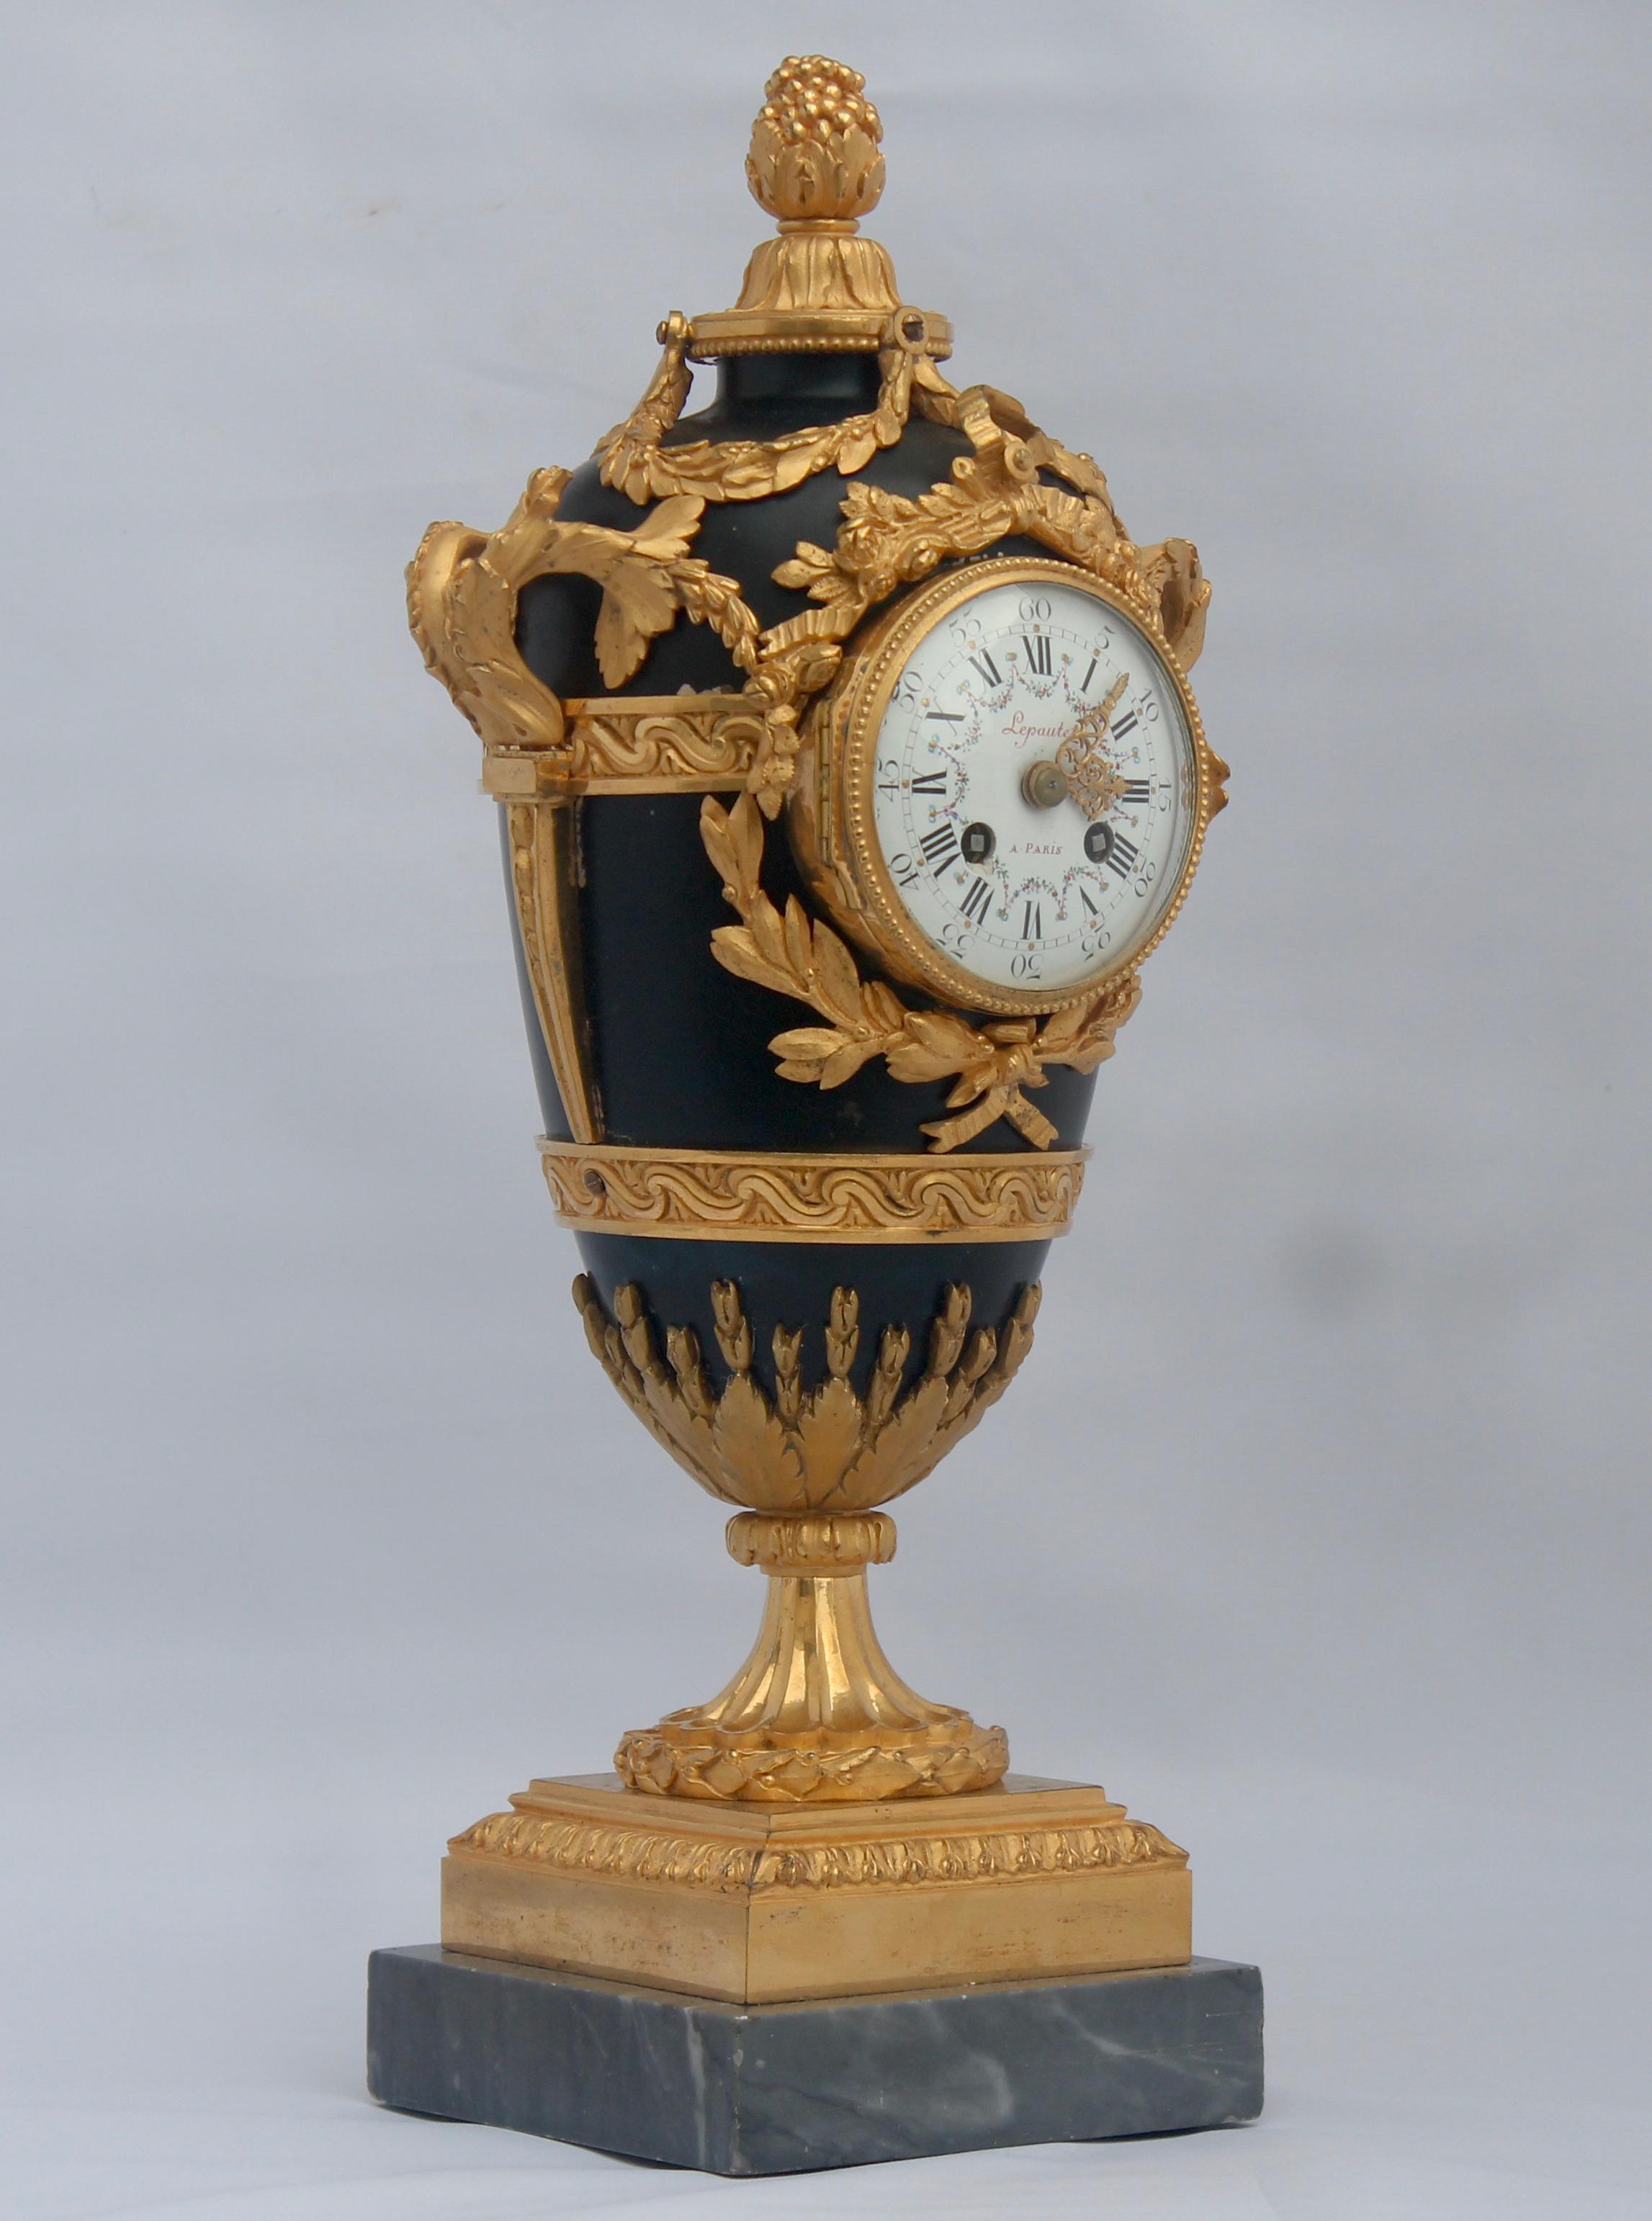 A French Louis XVI style ormolu and lacquered tole covered vase shape mantel clock
Blue lacquered tole covered with ormolu chiseled garlands decorated with flowers and knotted flowers, acanthus and asparagus.
At damping, a seeded bud, it rests on a